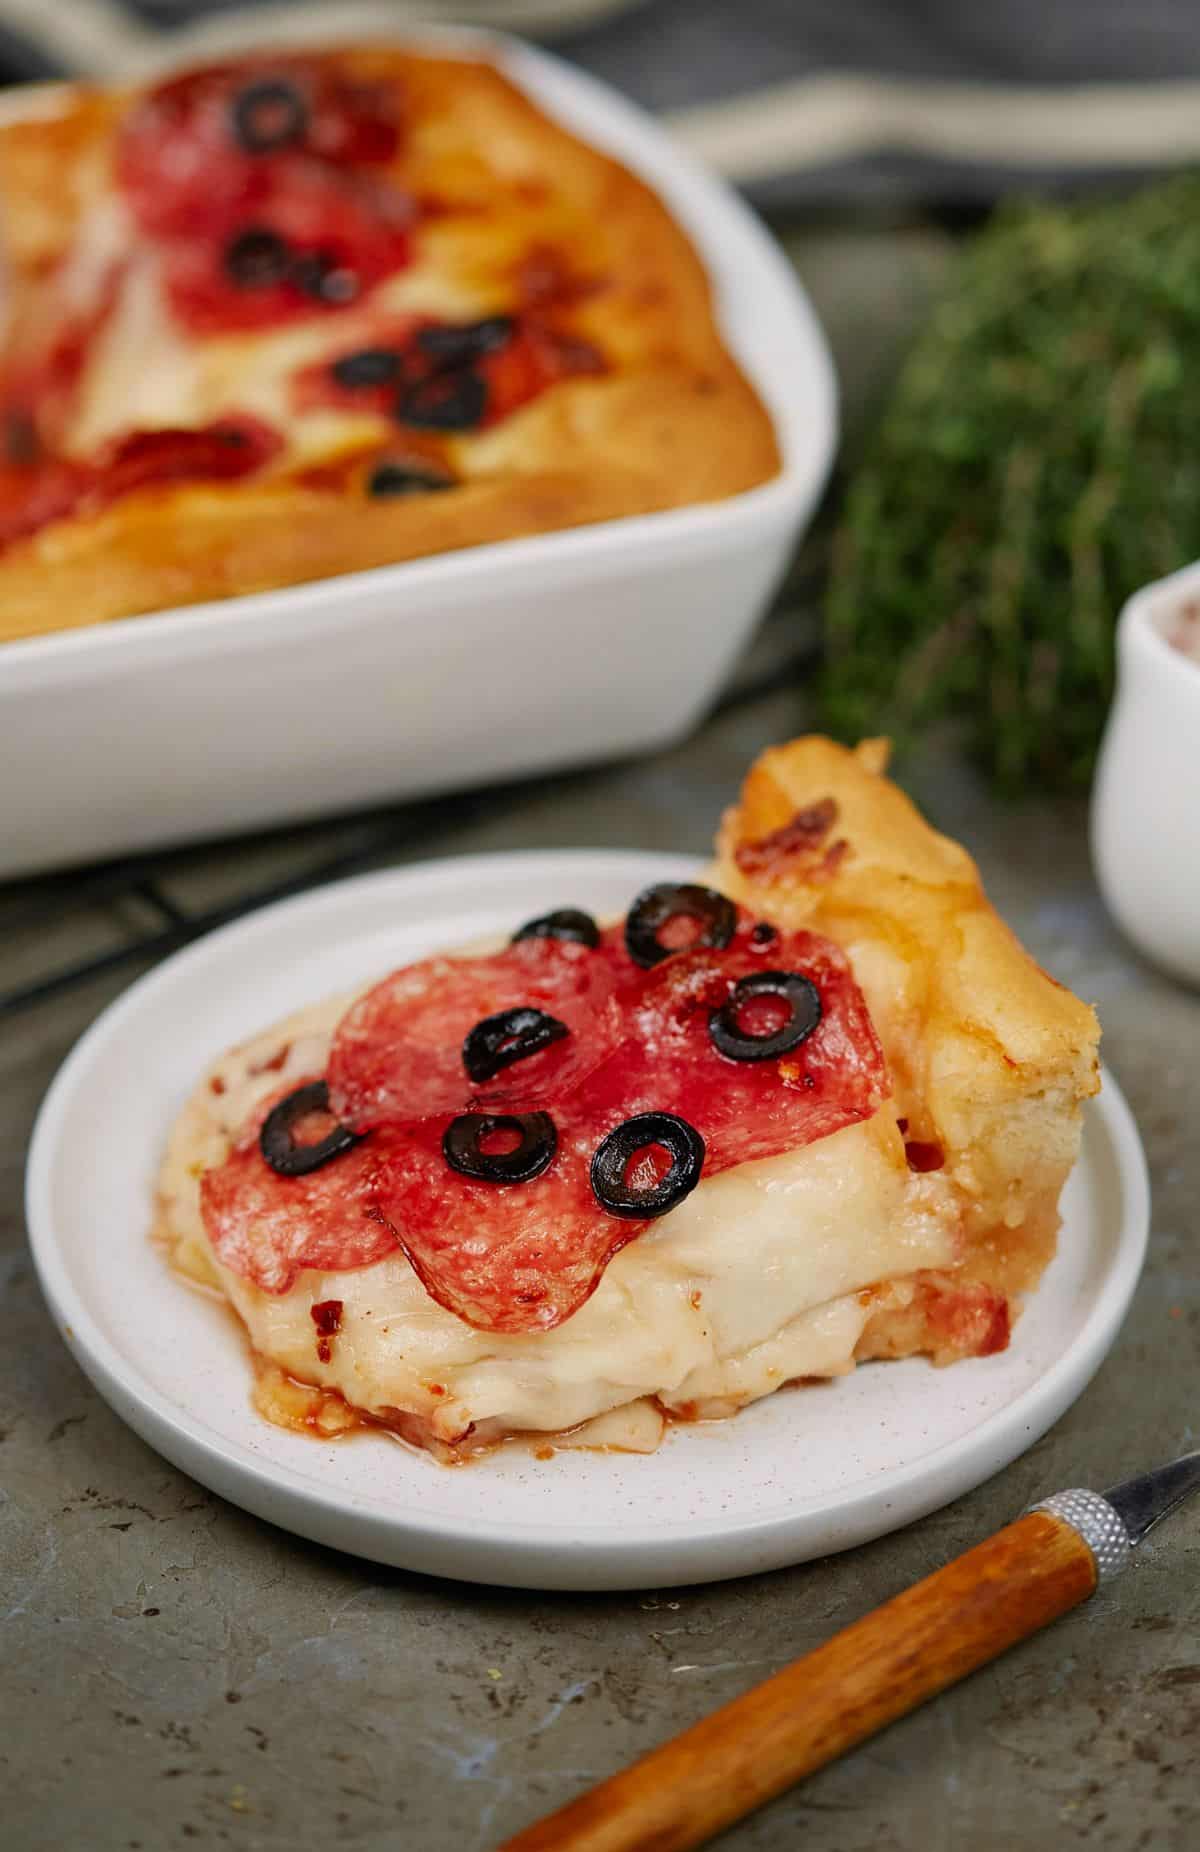 slice of deep dish pizza with salami and olive top on round saucer by white casserole dish